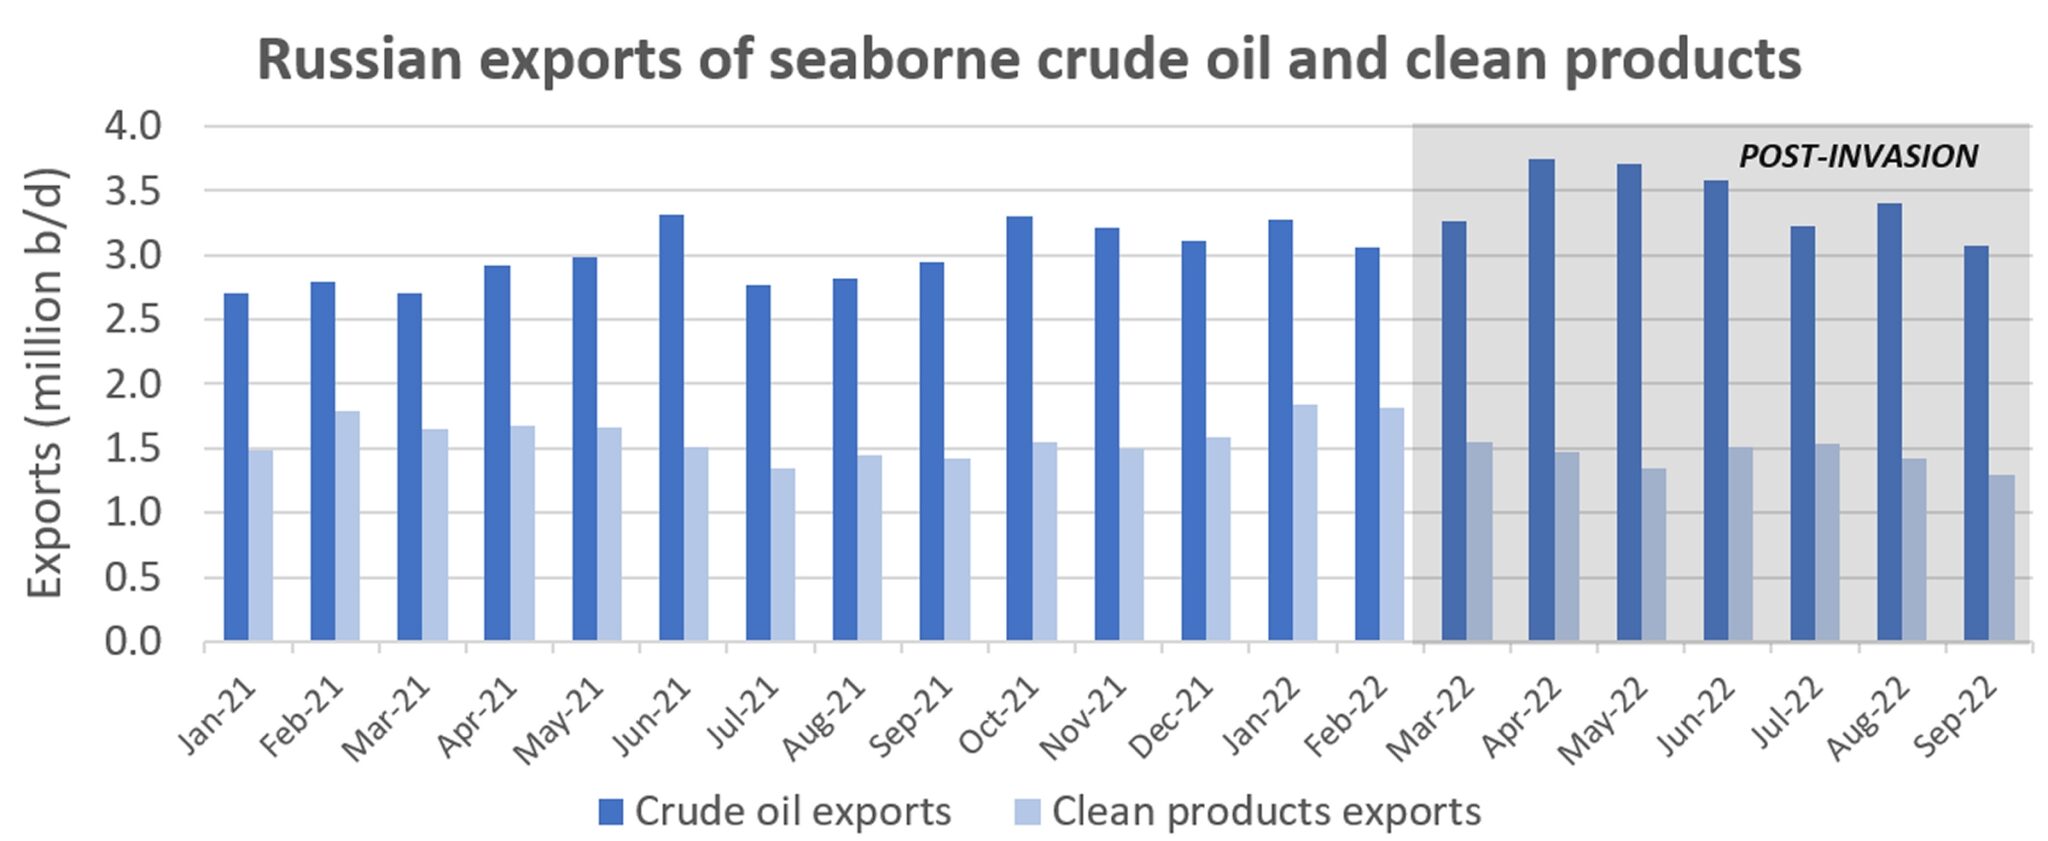 Russian oil exports are still booming and EU is still reliant on Russia